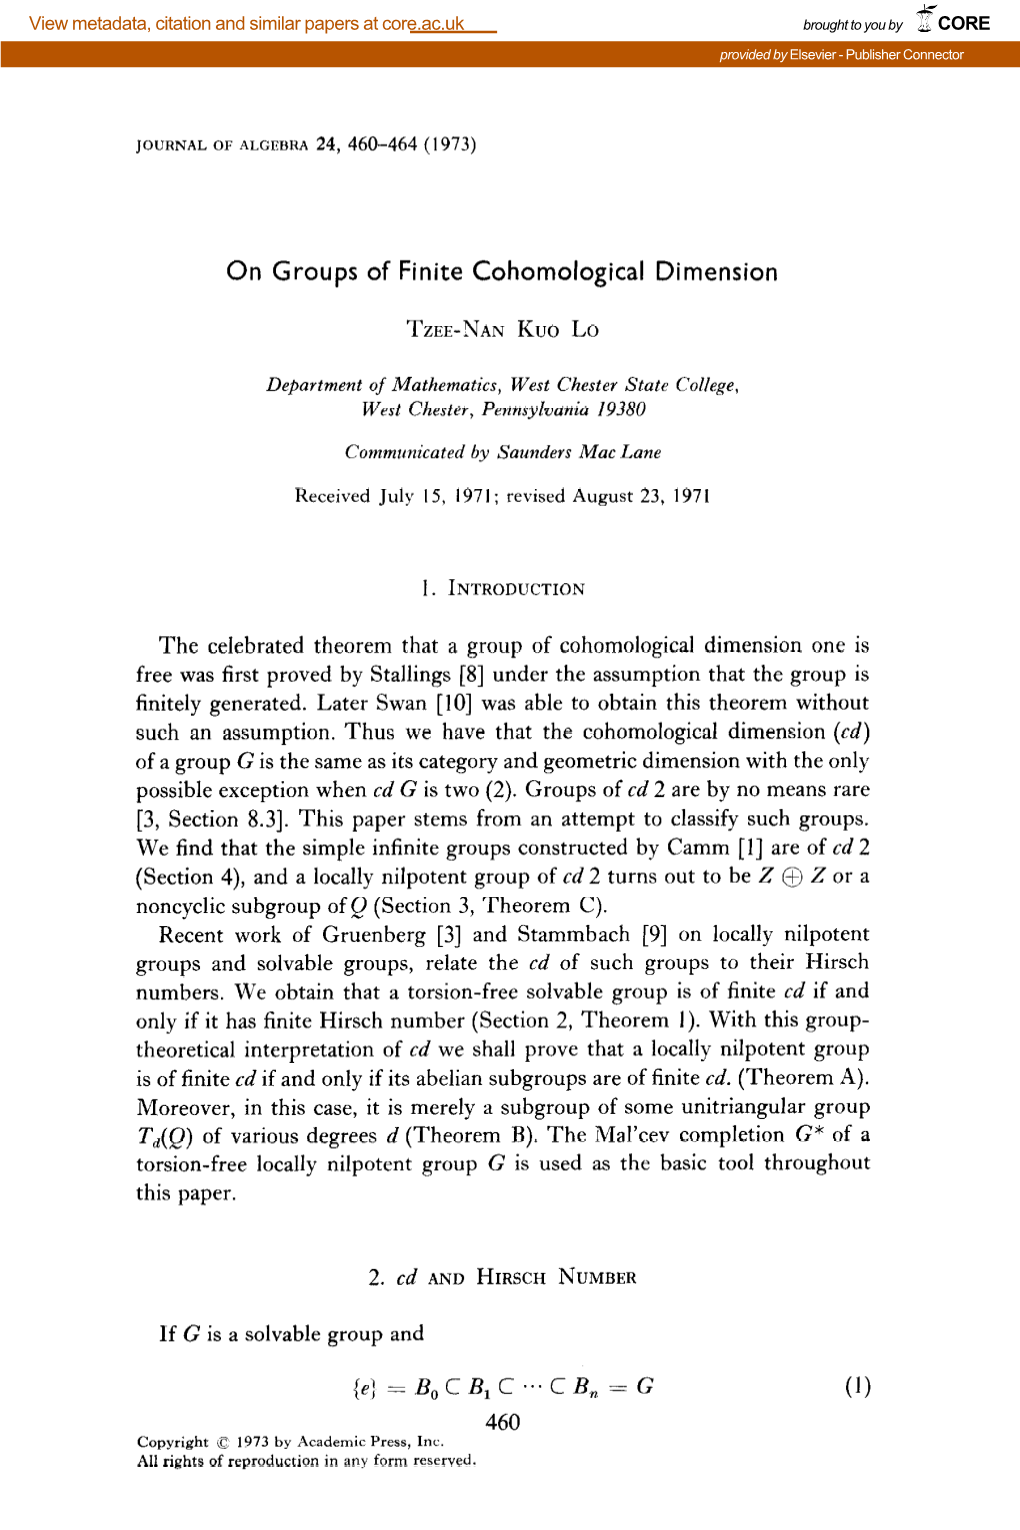 On Groups of Finite Cohomological Dimension